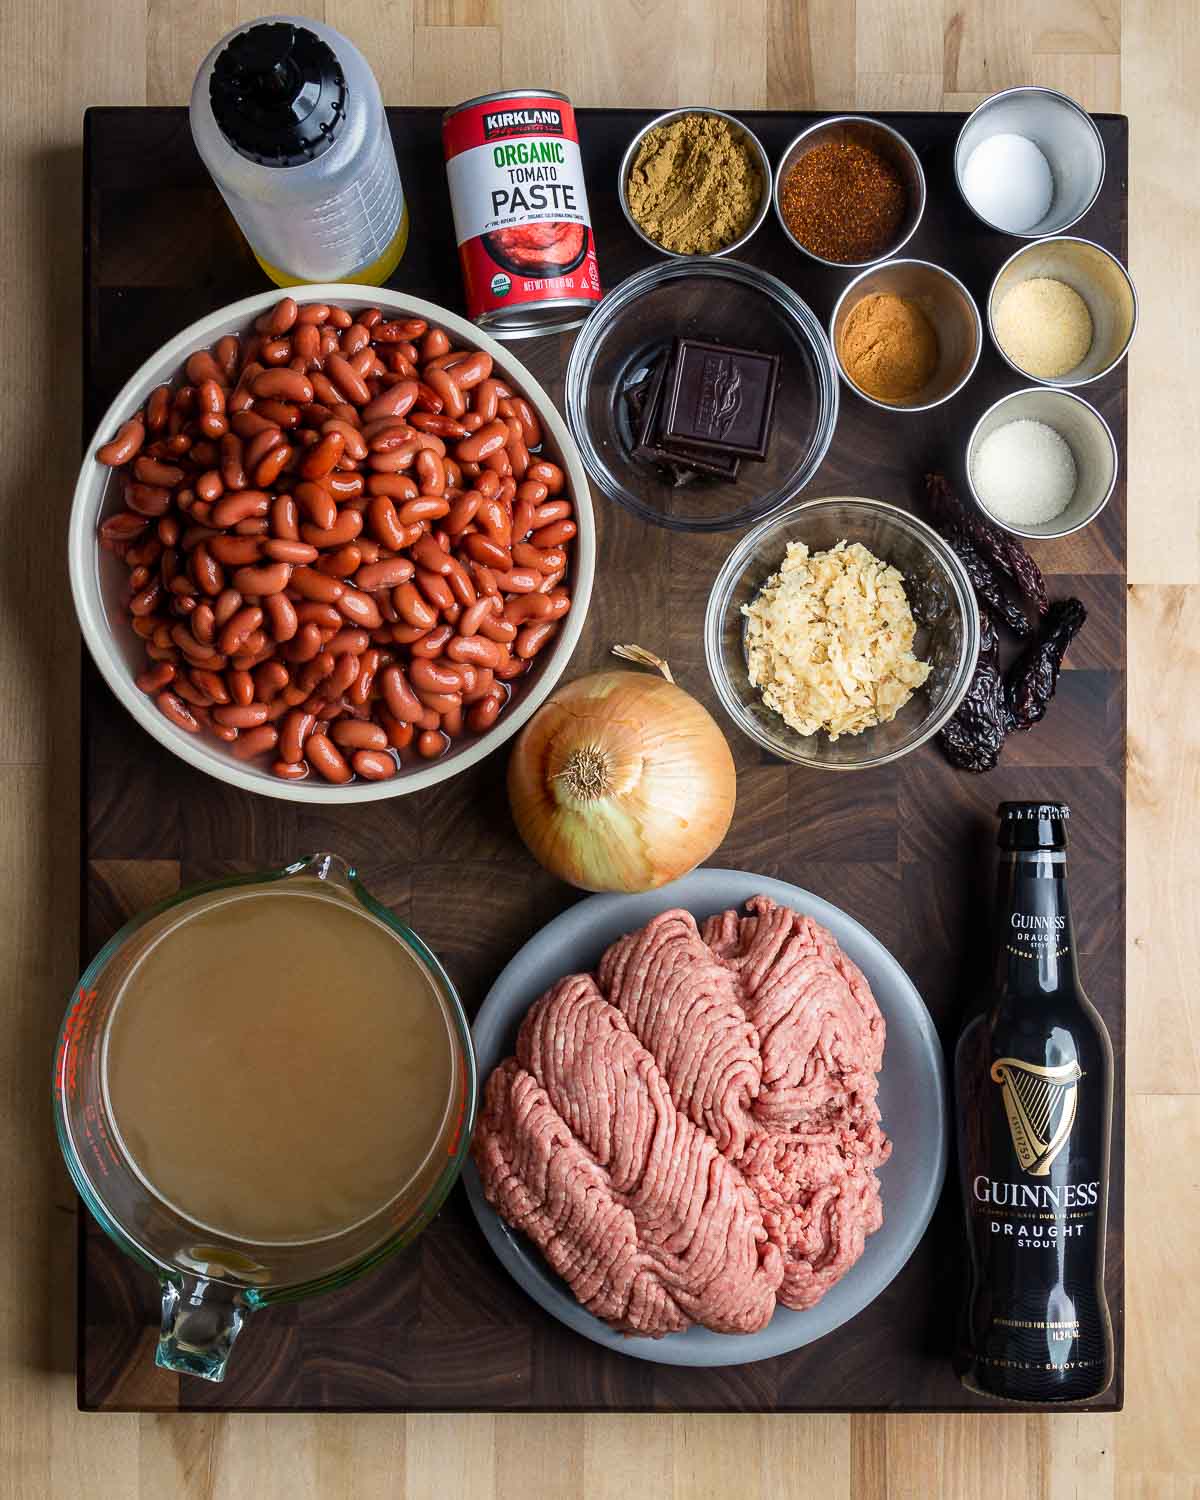 Ingredients shown: vegetable oil, tomato paste, dark chocolate, chile powder and spices, whole dried chiles, kidney beans, onion, tortilla chips, beef stock, ground chuck, and beer.